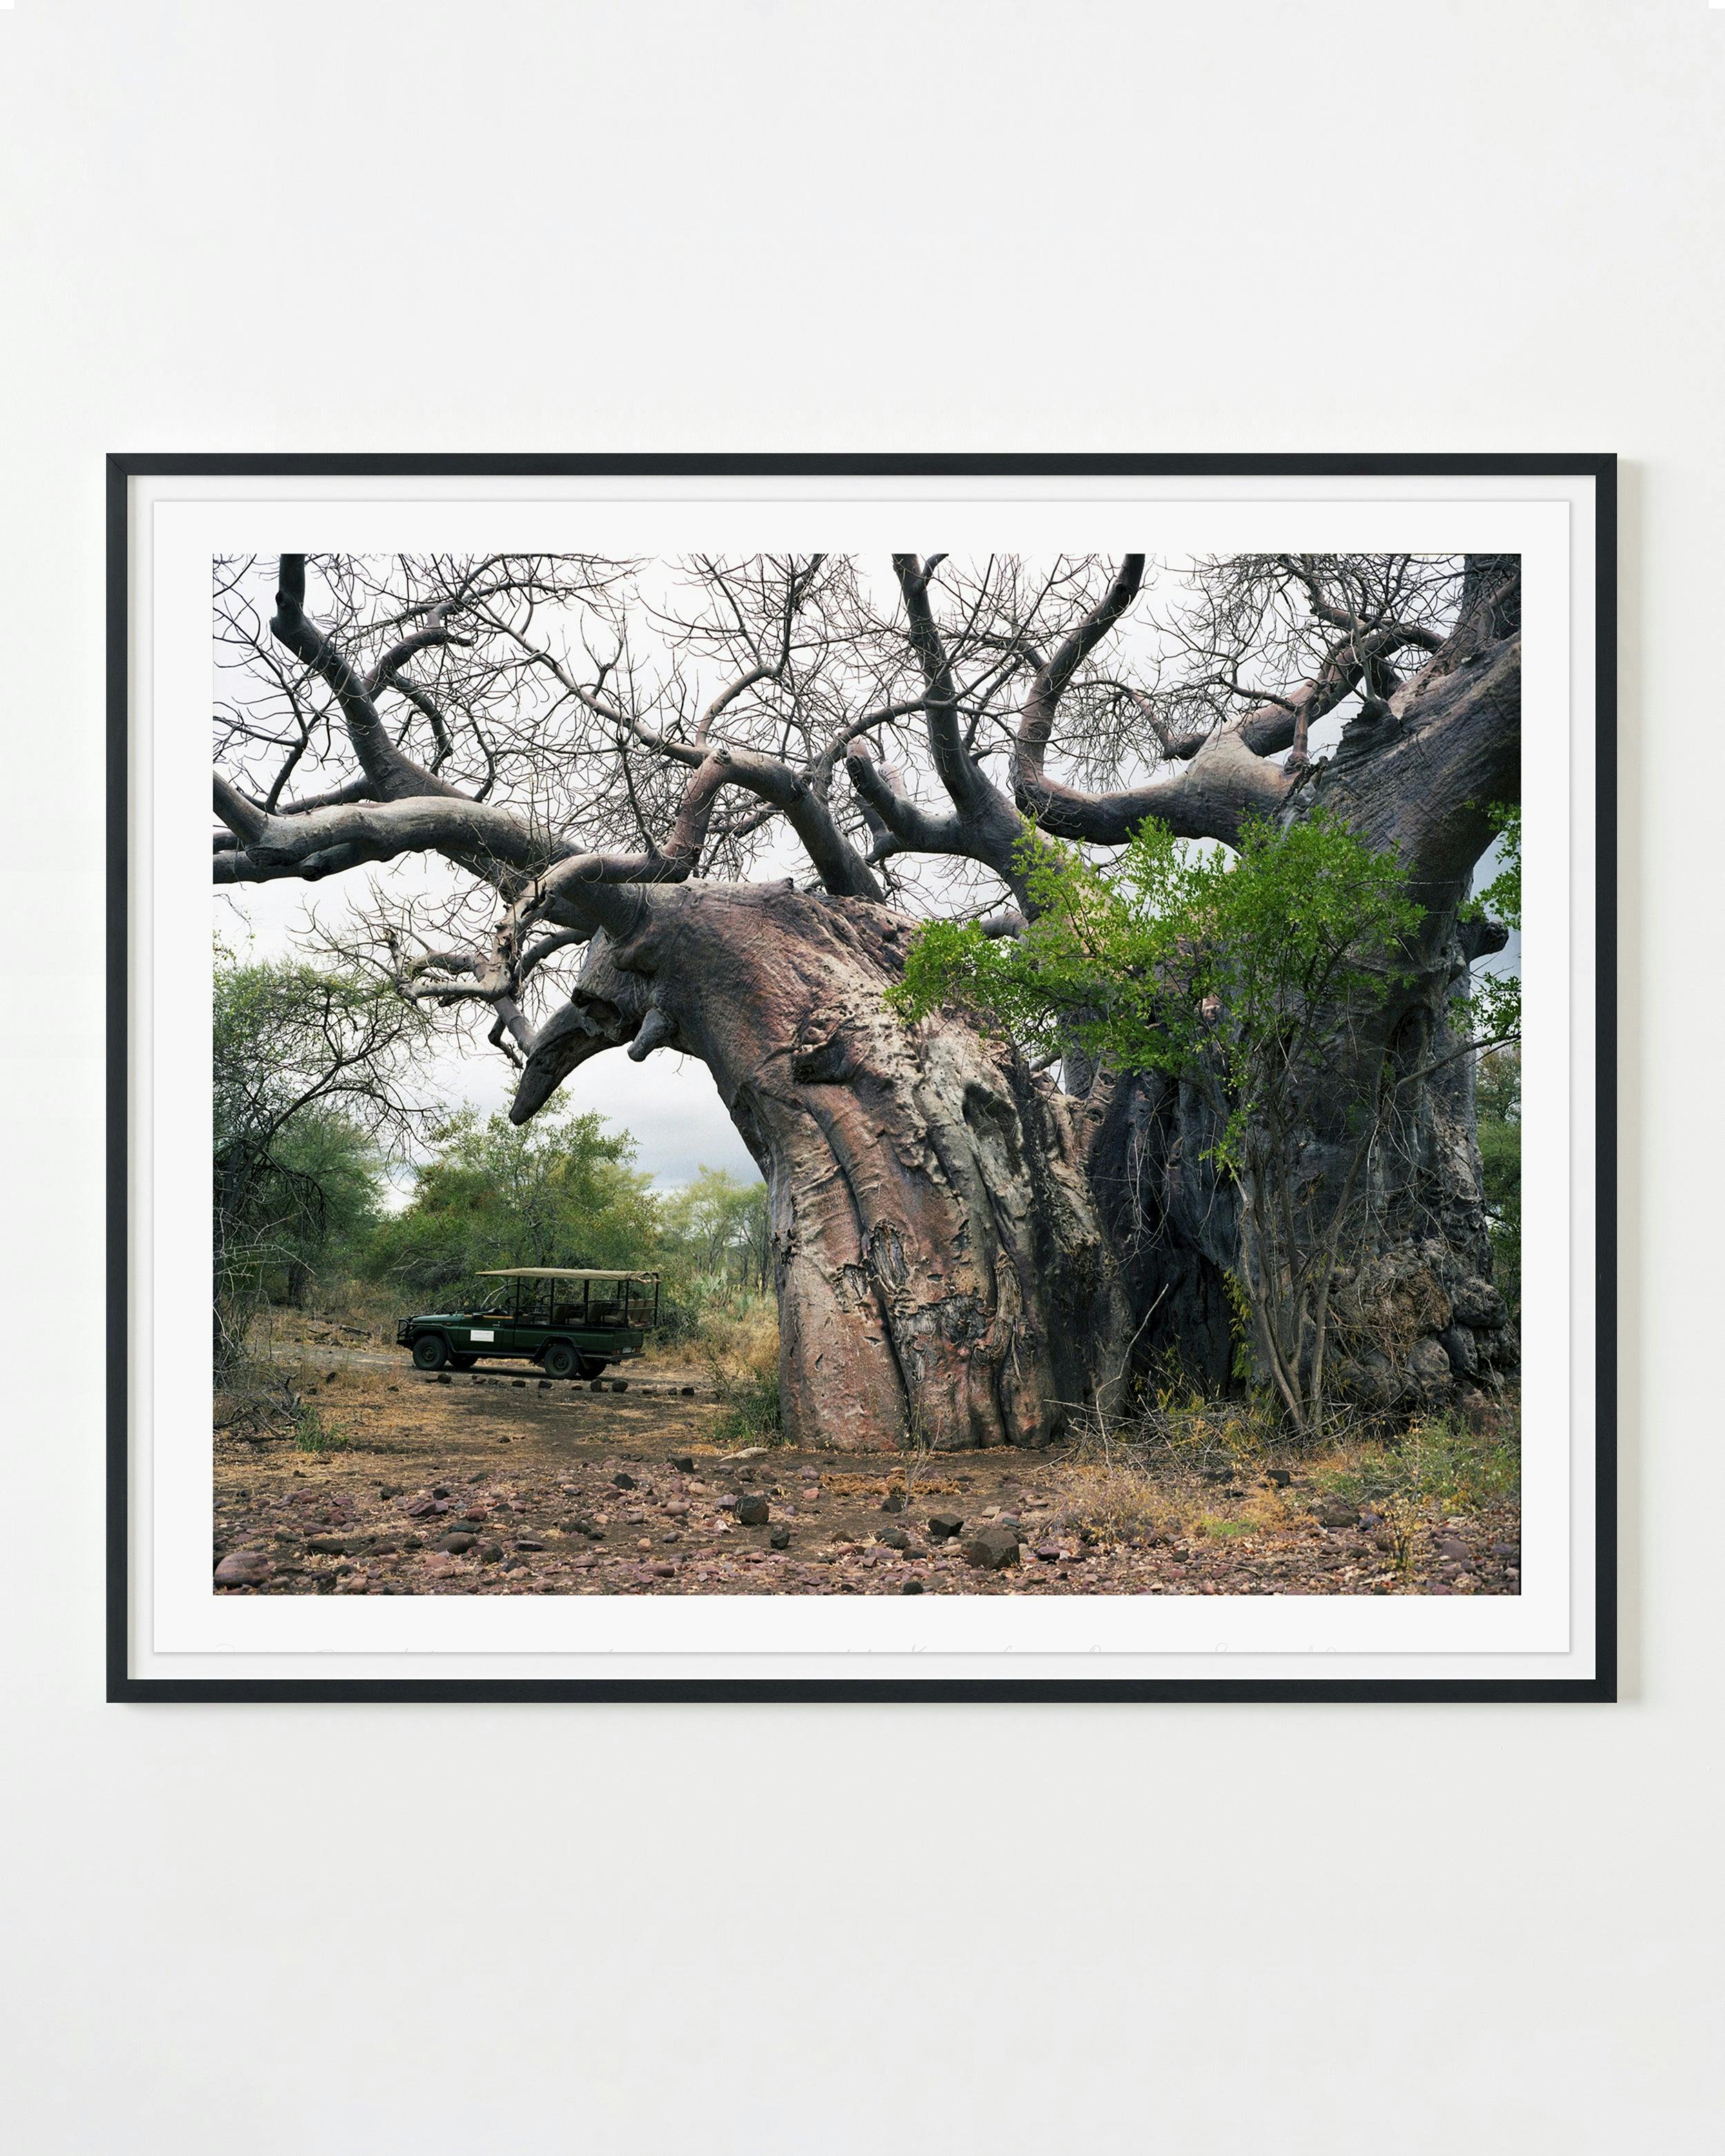 Photography by Rachel Sussman titled "Pafuri baobab #0707-1335 (Up to 2,000 years old; Kruger Game Preserve, South Afr".